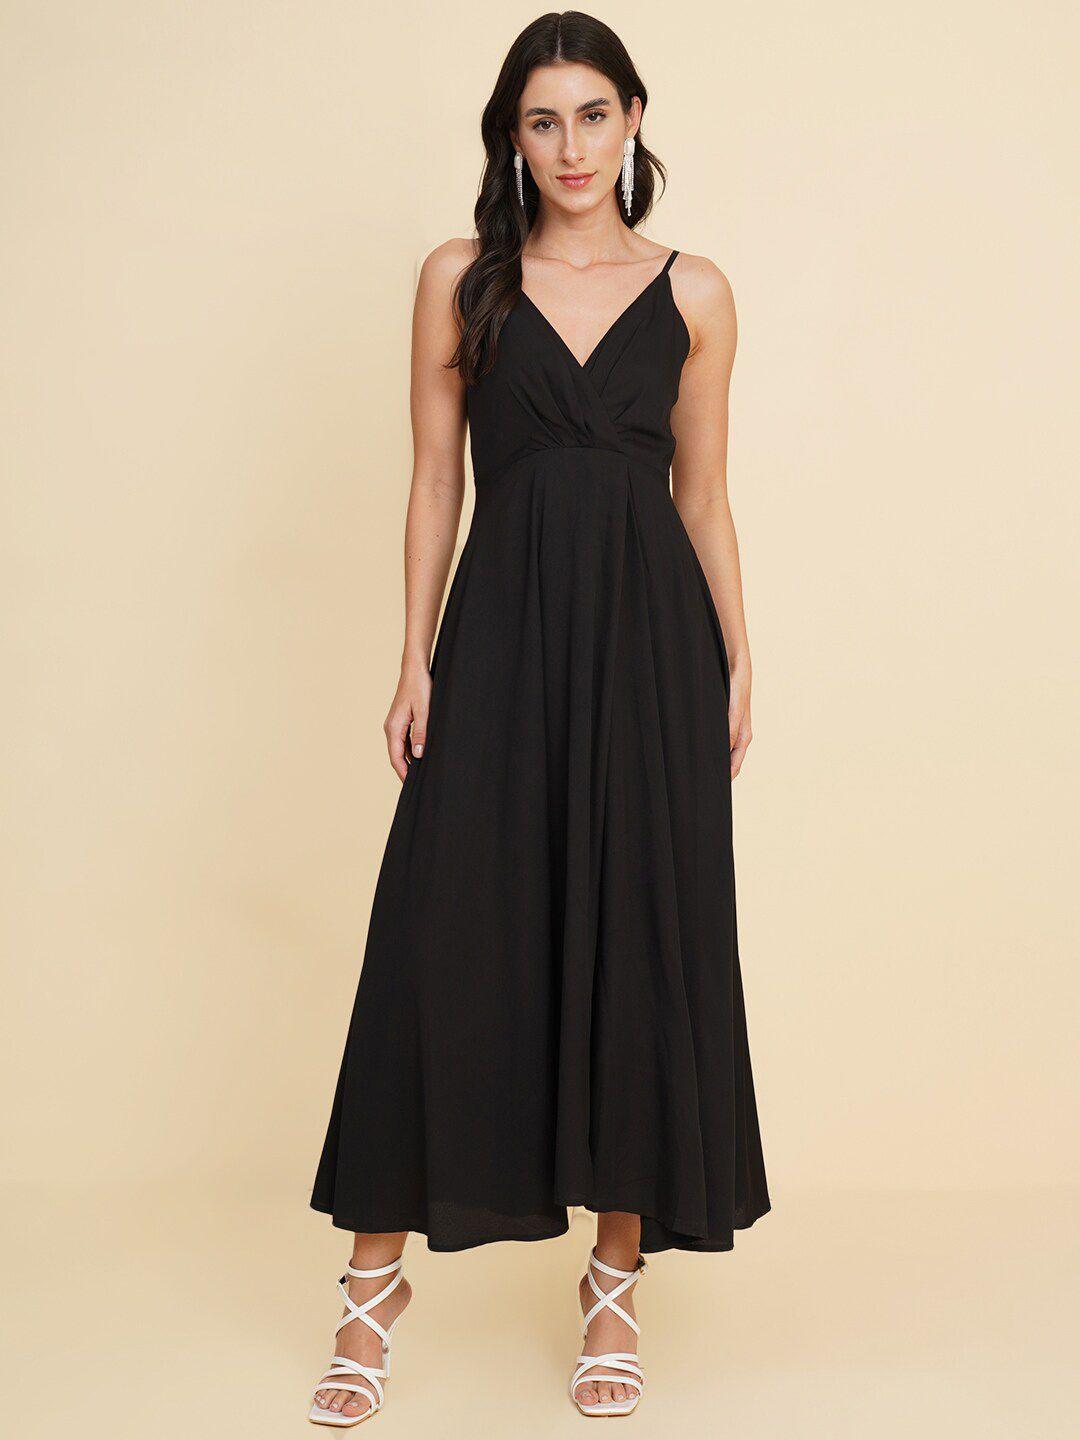 house of kkarma shoulder straps gathered or pleated maxi dress